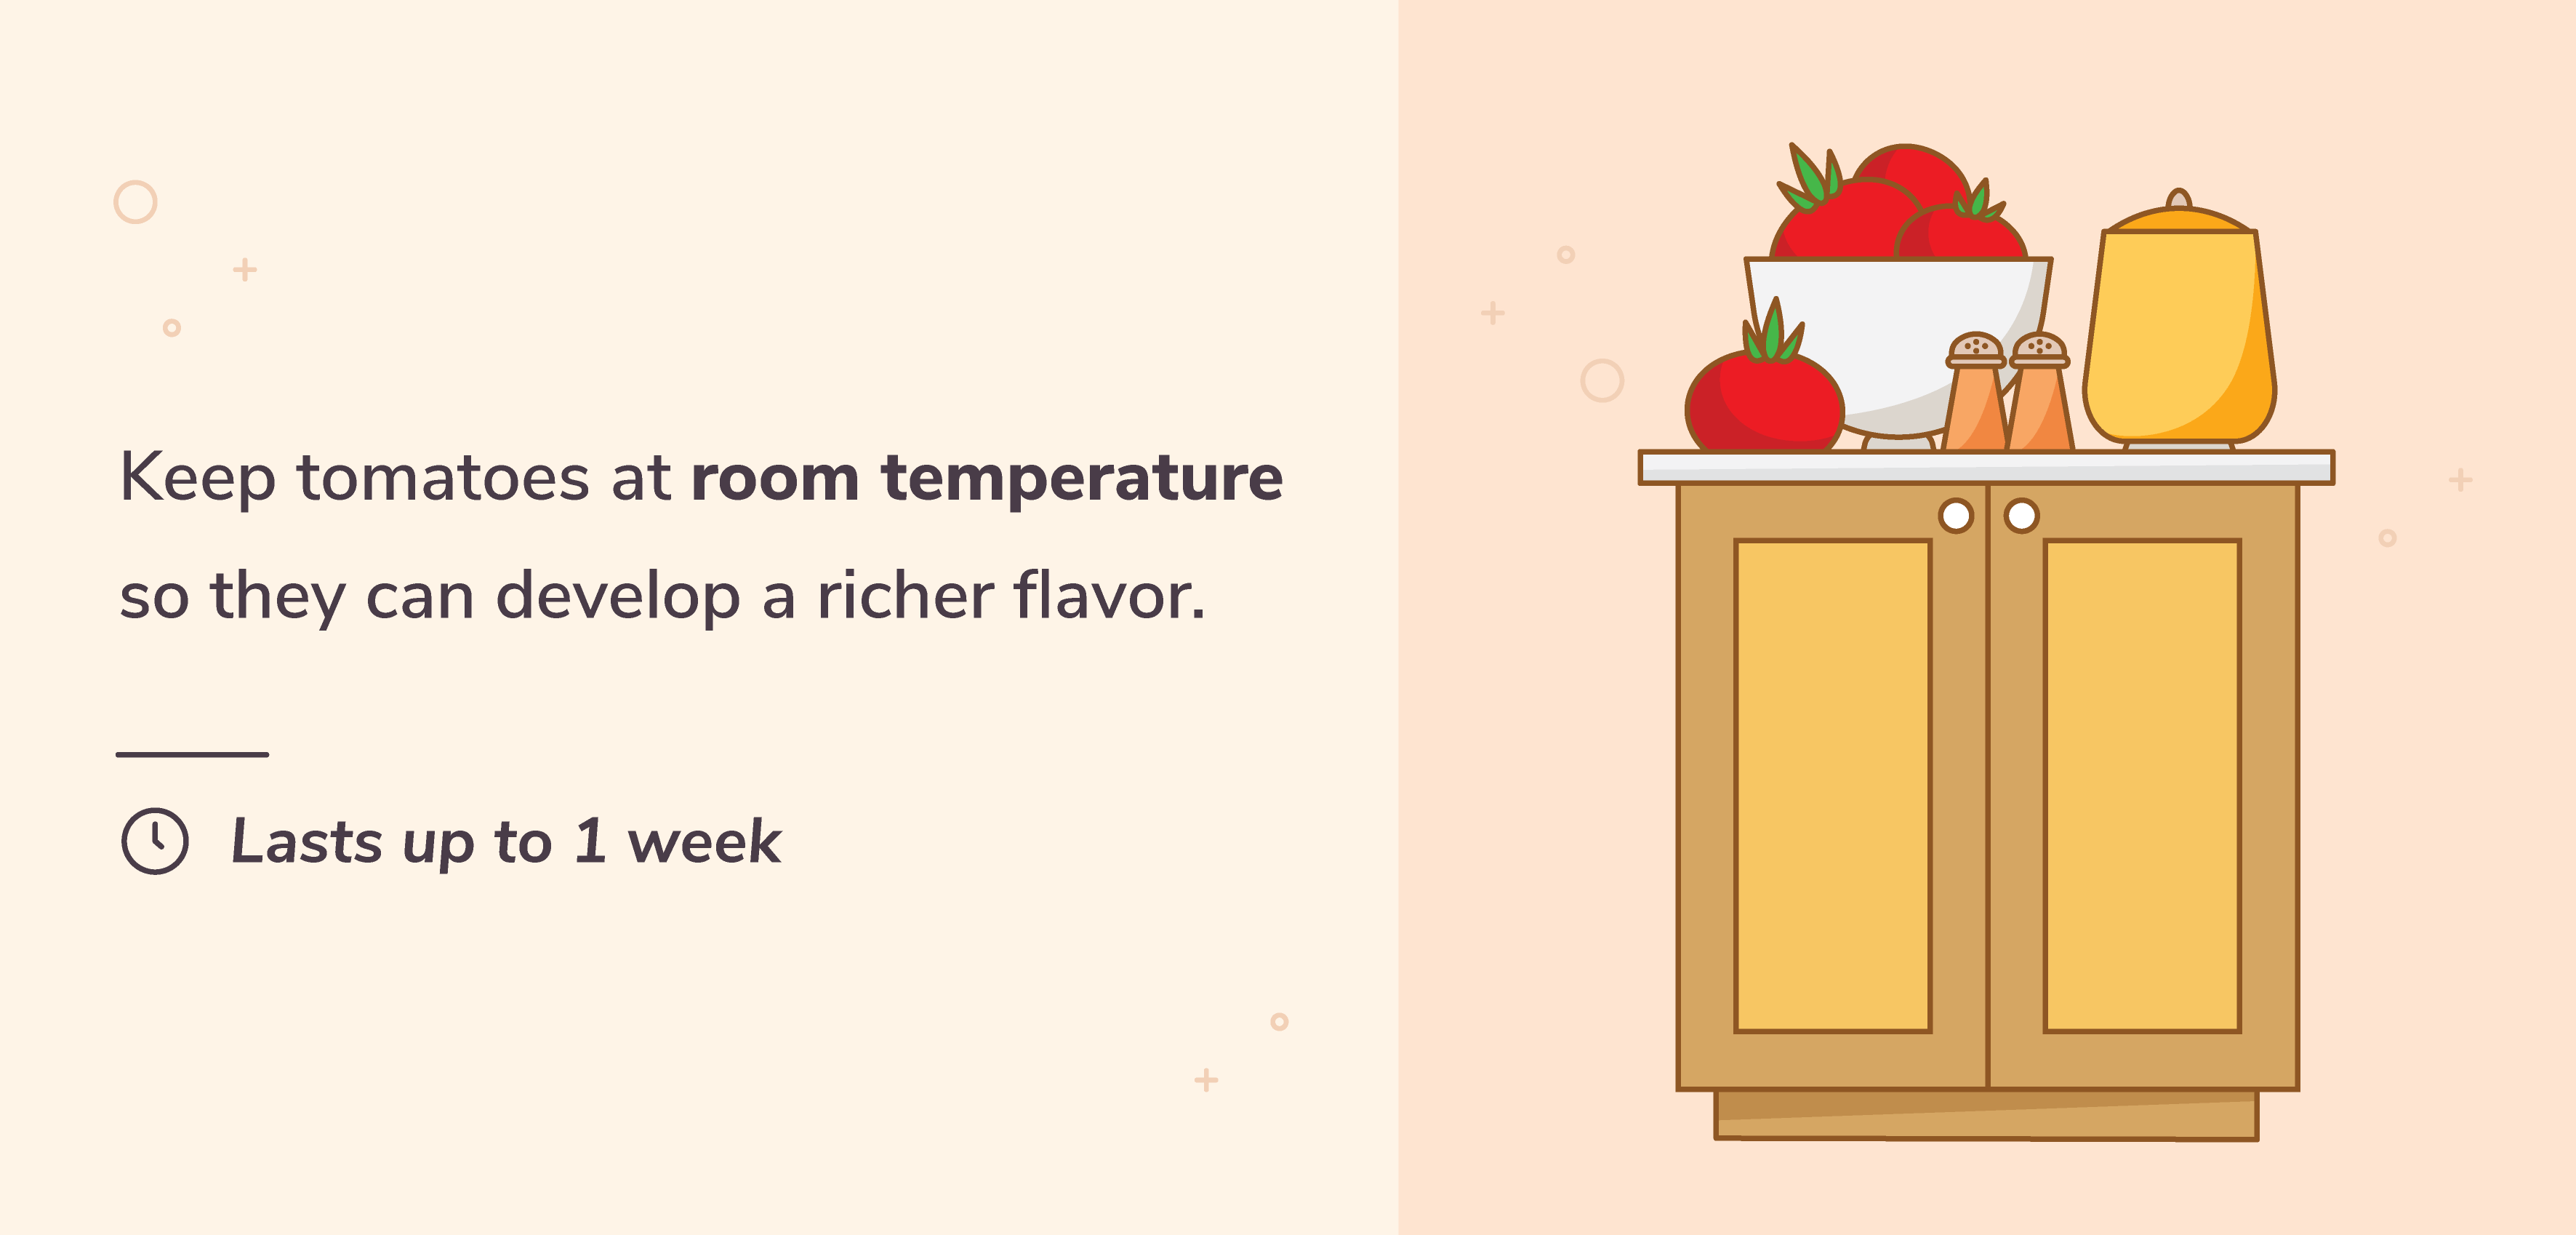 Store tomatoes at room temperature so their flavor can continue to develop.